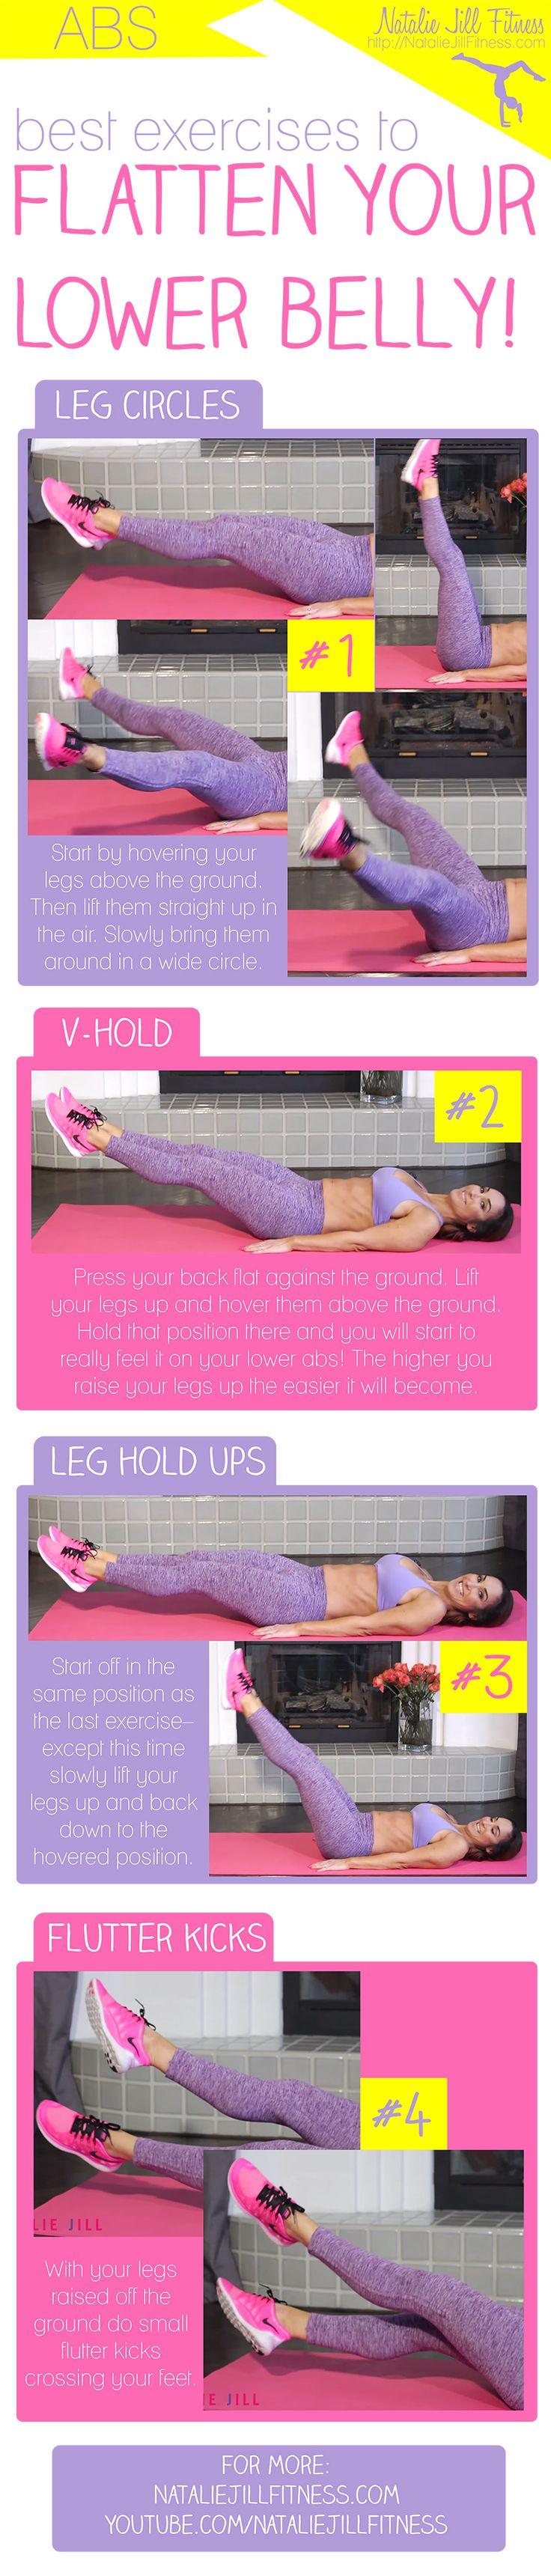 Hochzeit - Printable Workout Cards From Natalie Jill Fitness